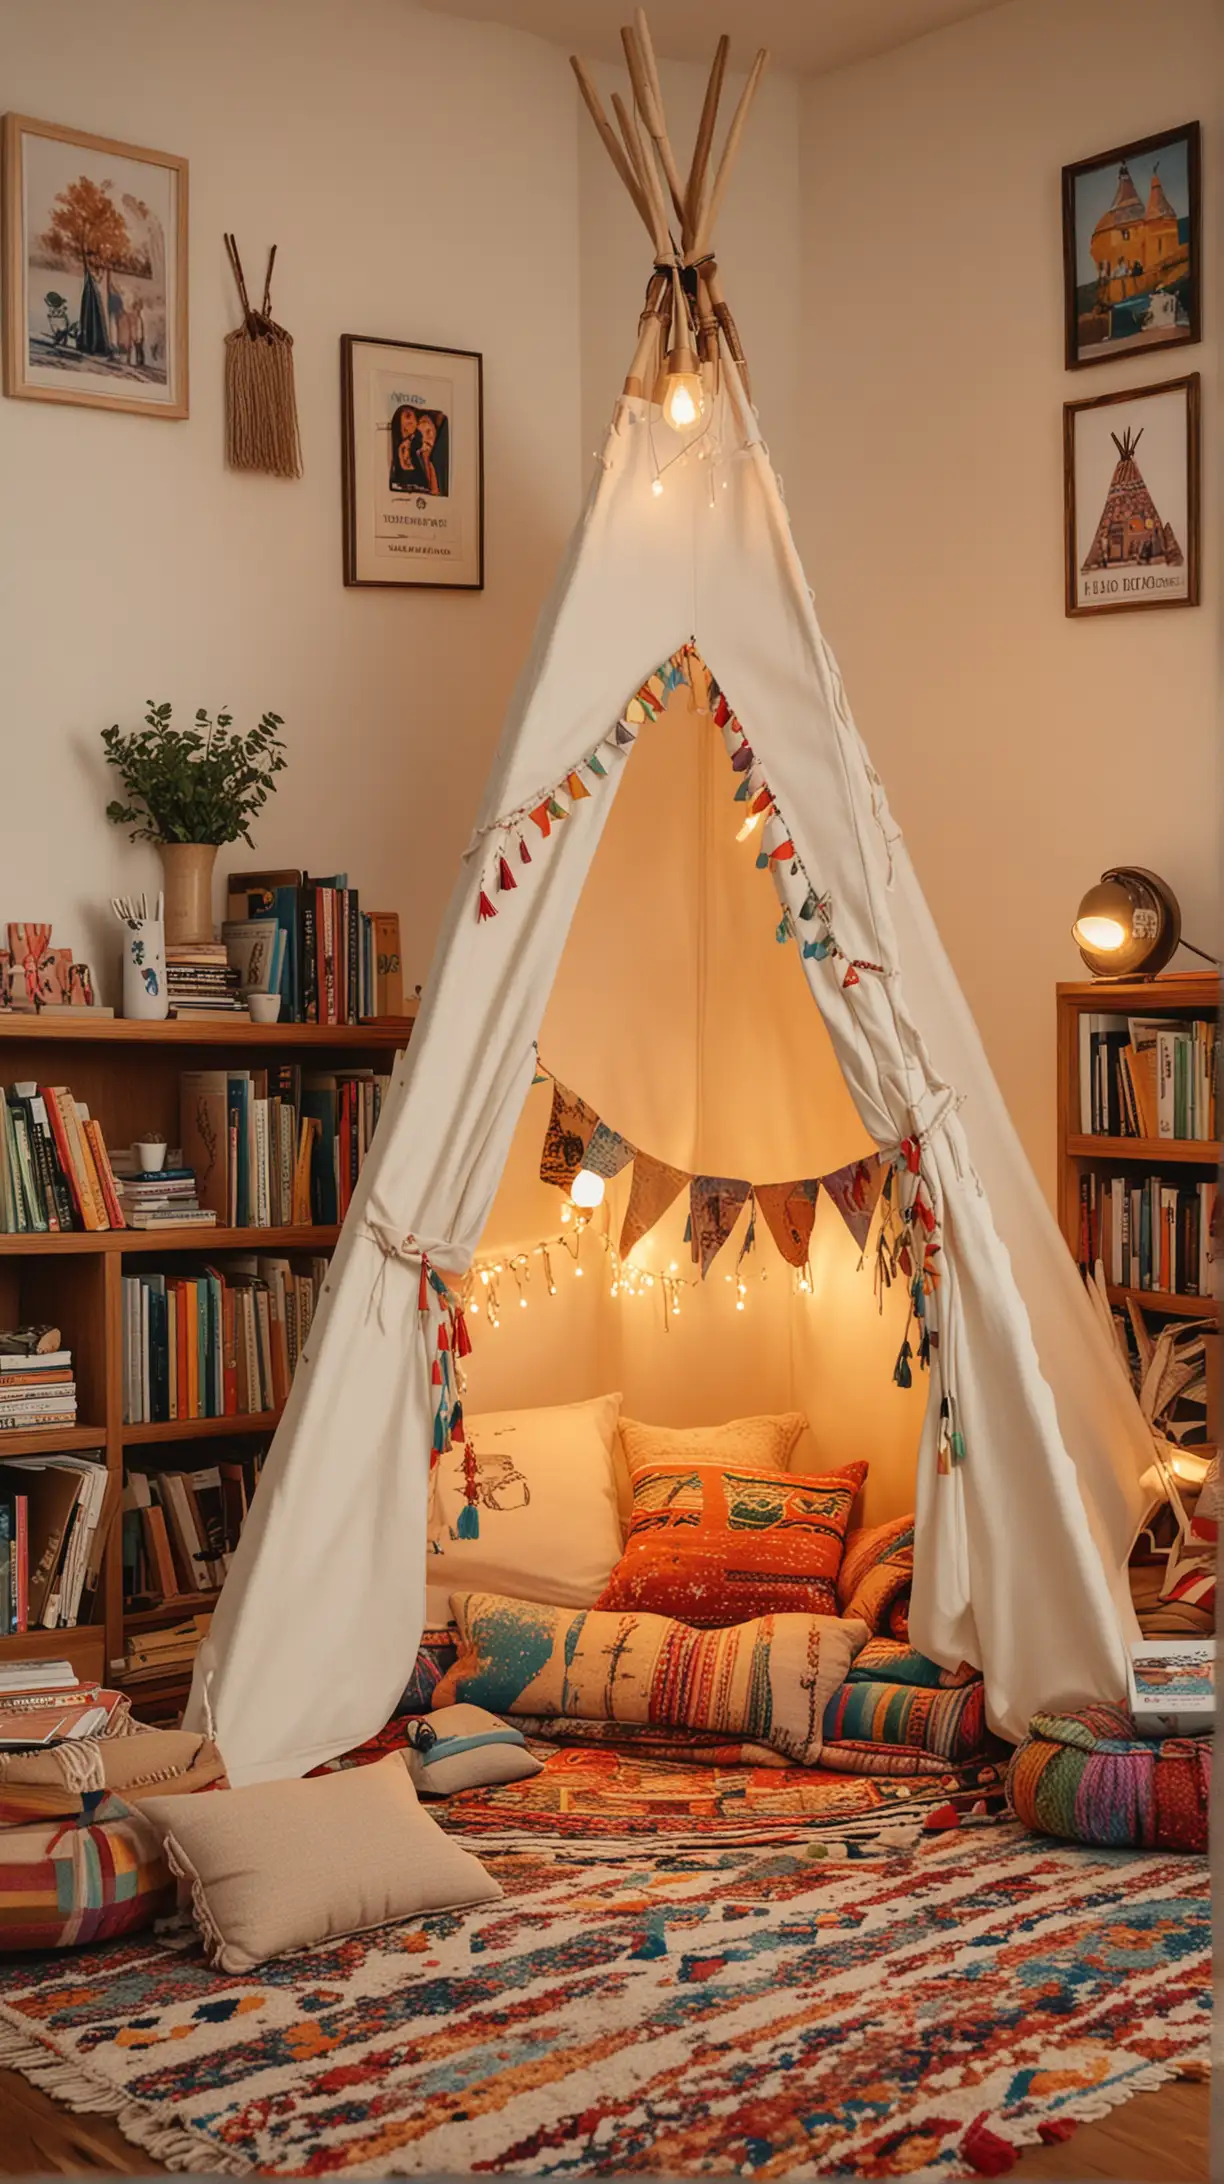 Colorful teepee tent in a cozy living room corner, adorned with cushions and a small rug inside, children's books scattered around, warm lighting.